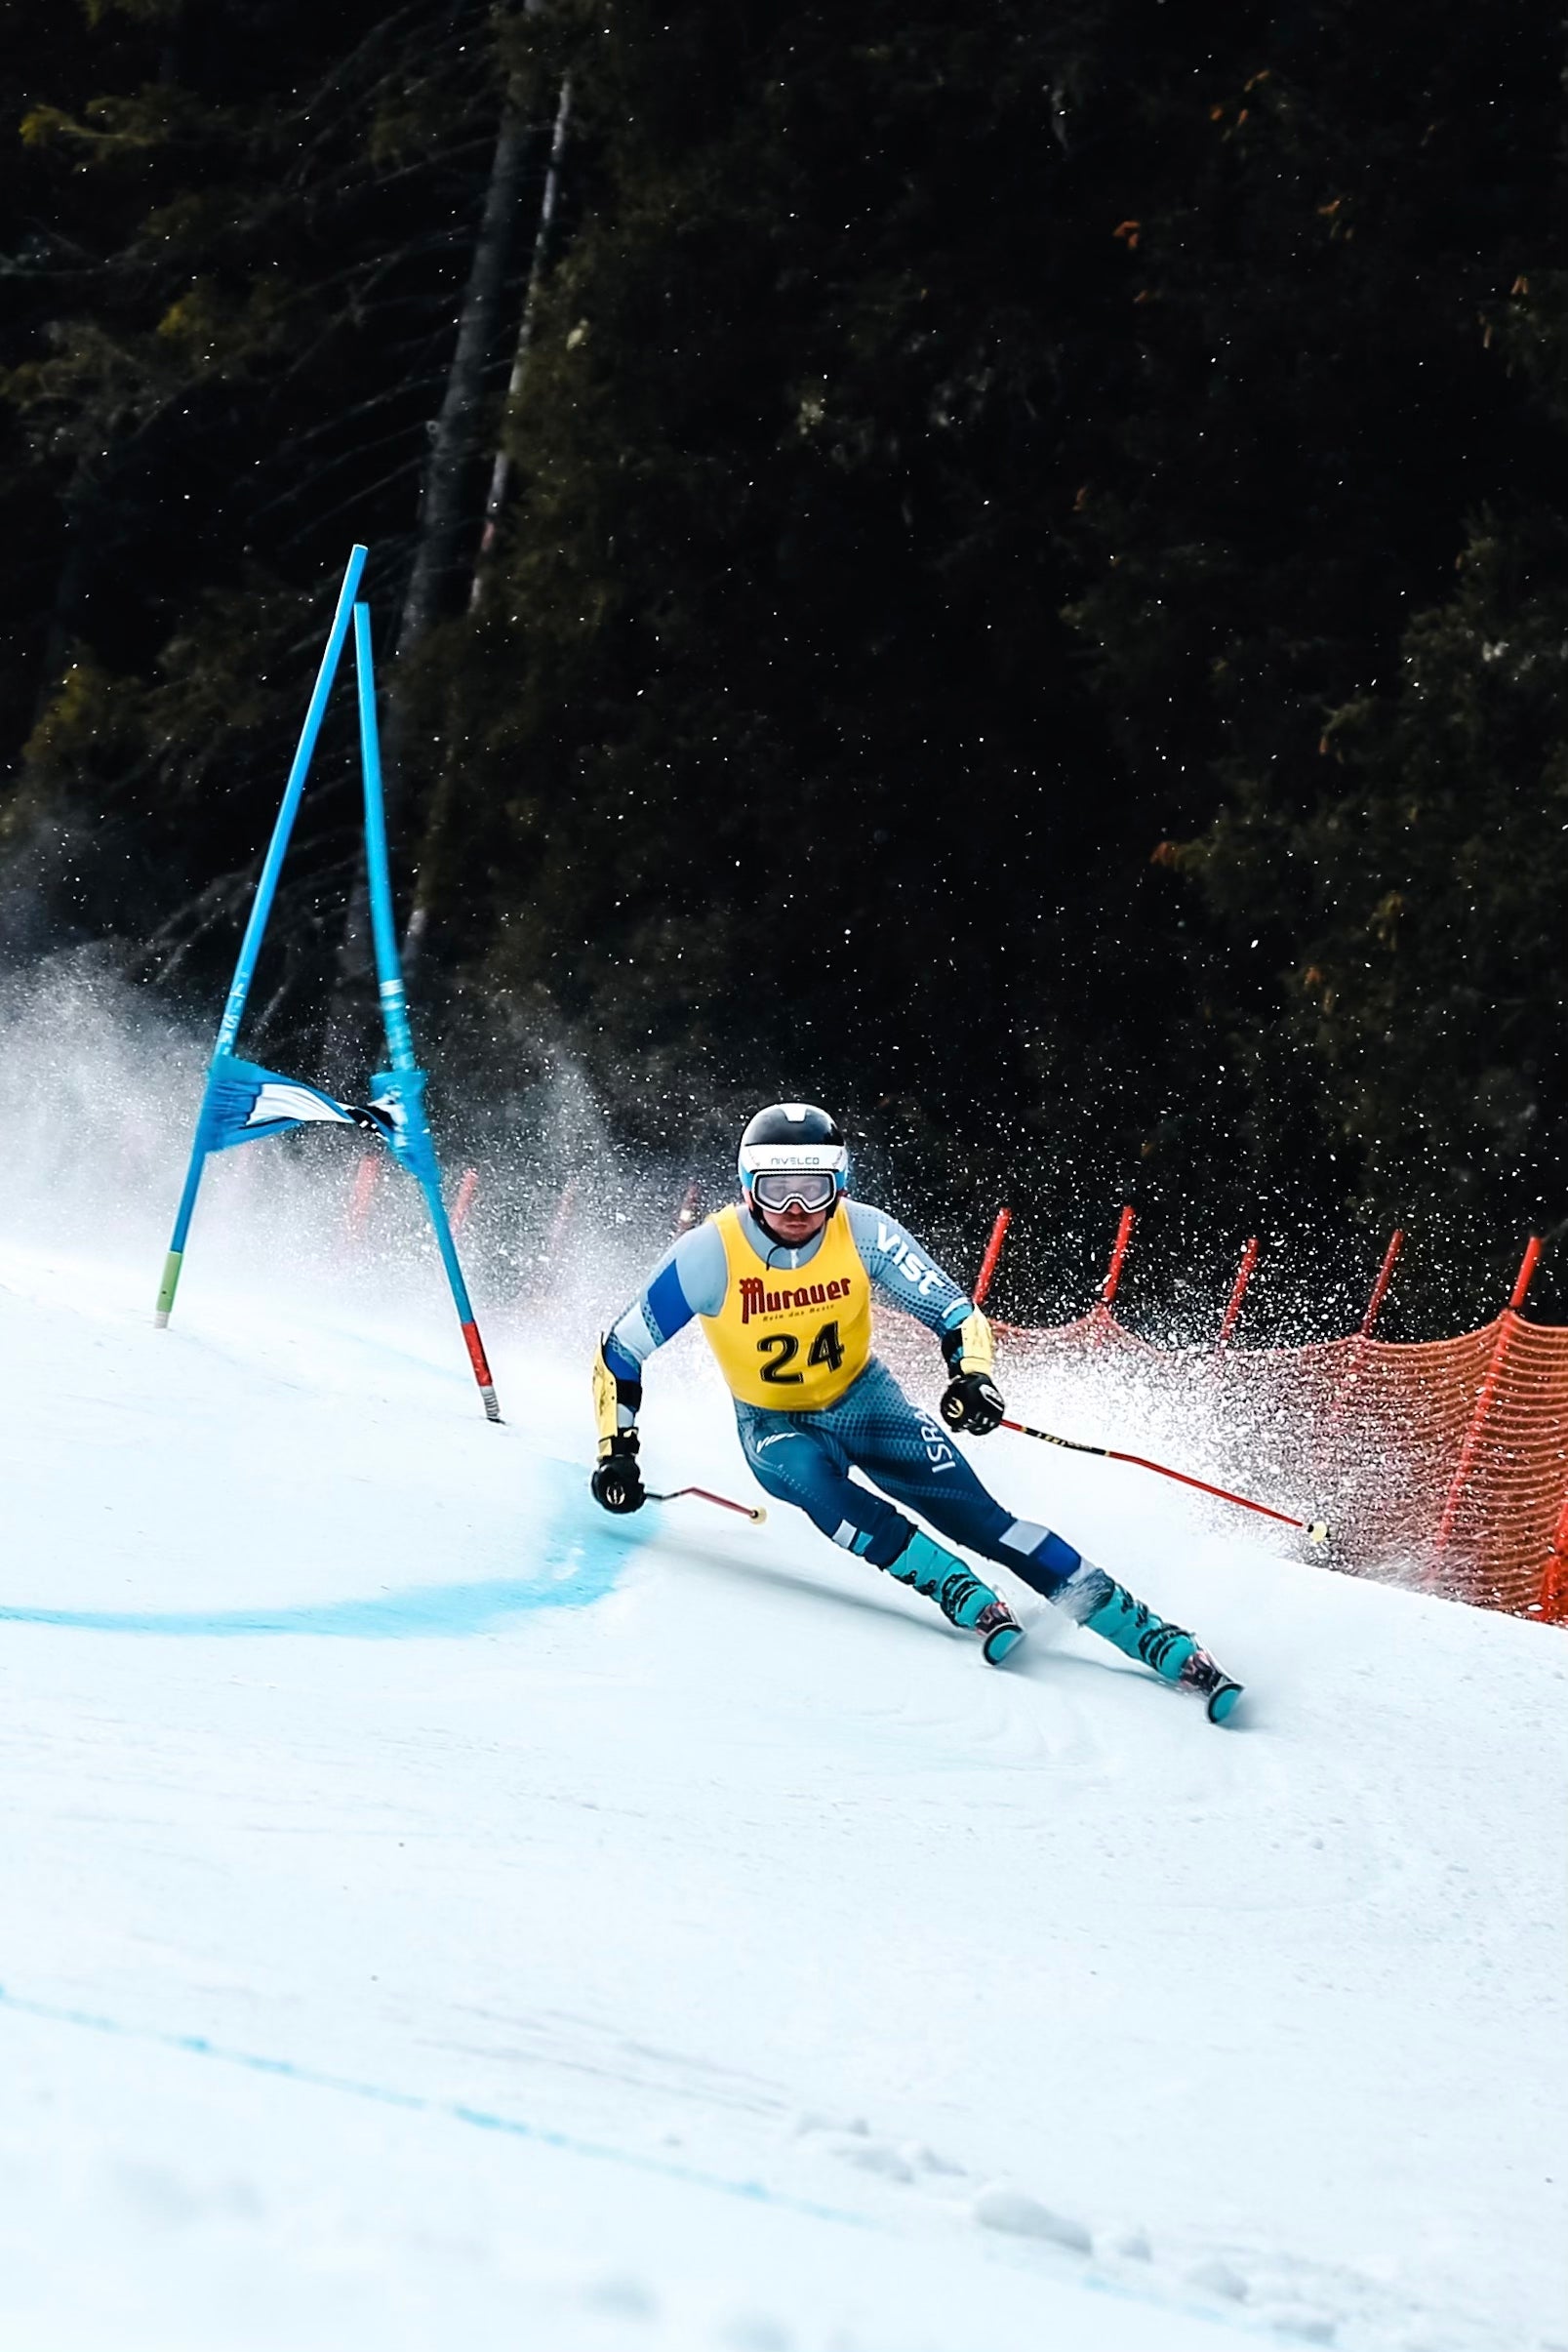 Carving-Turn-Ski-Race-World-Cup